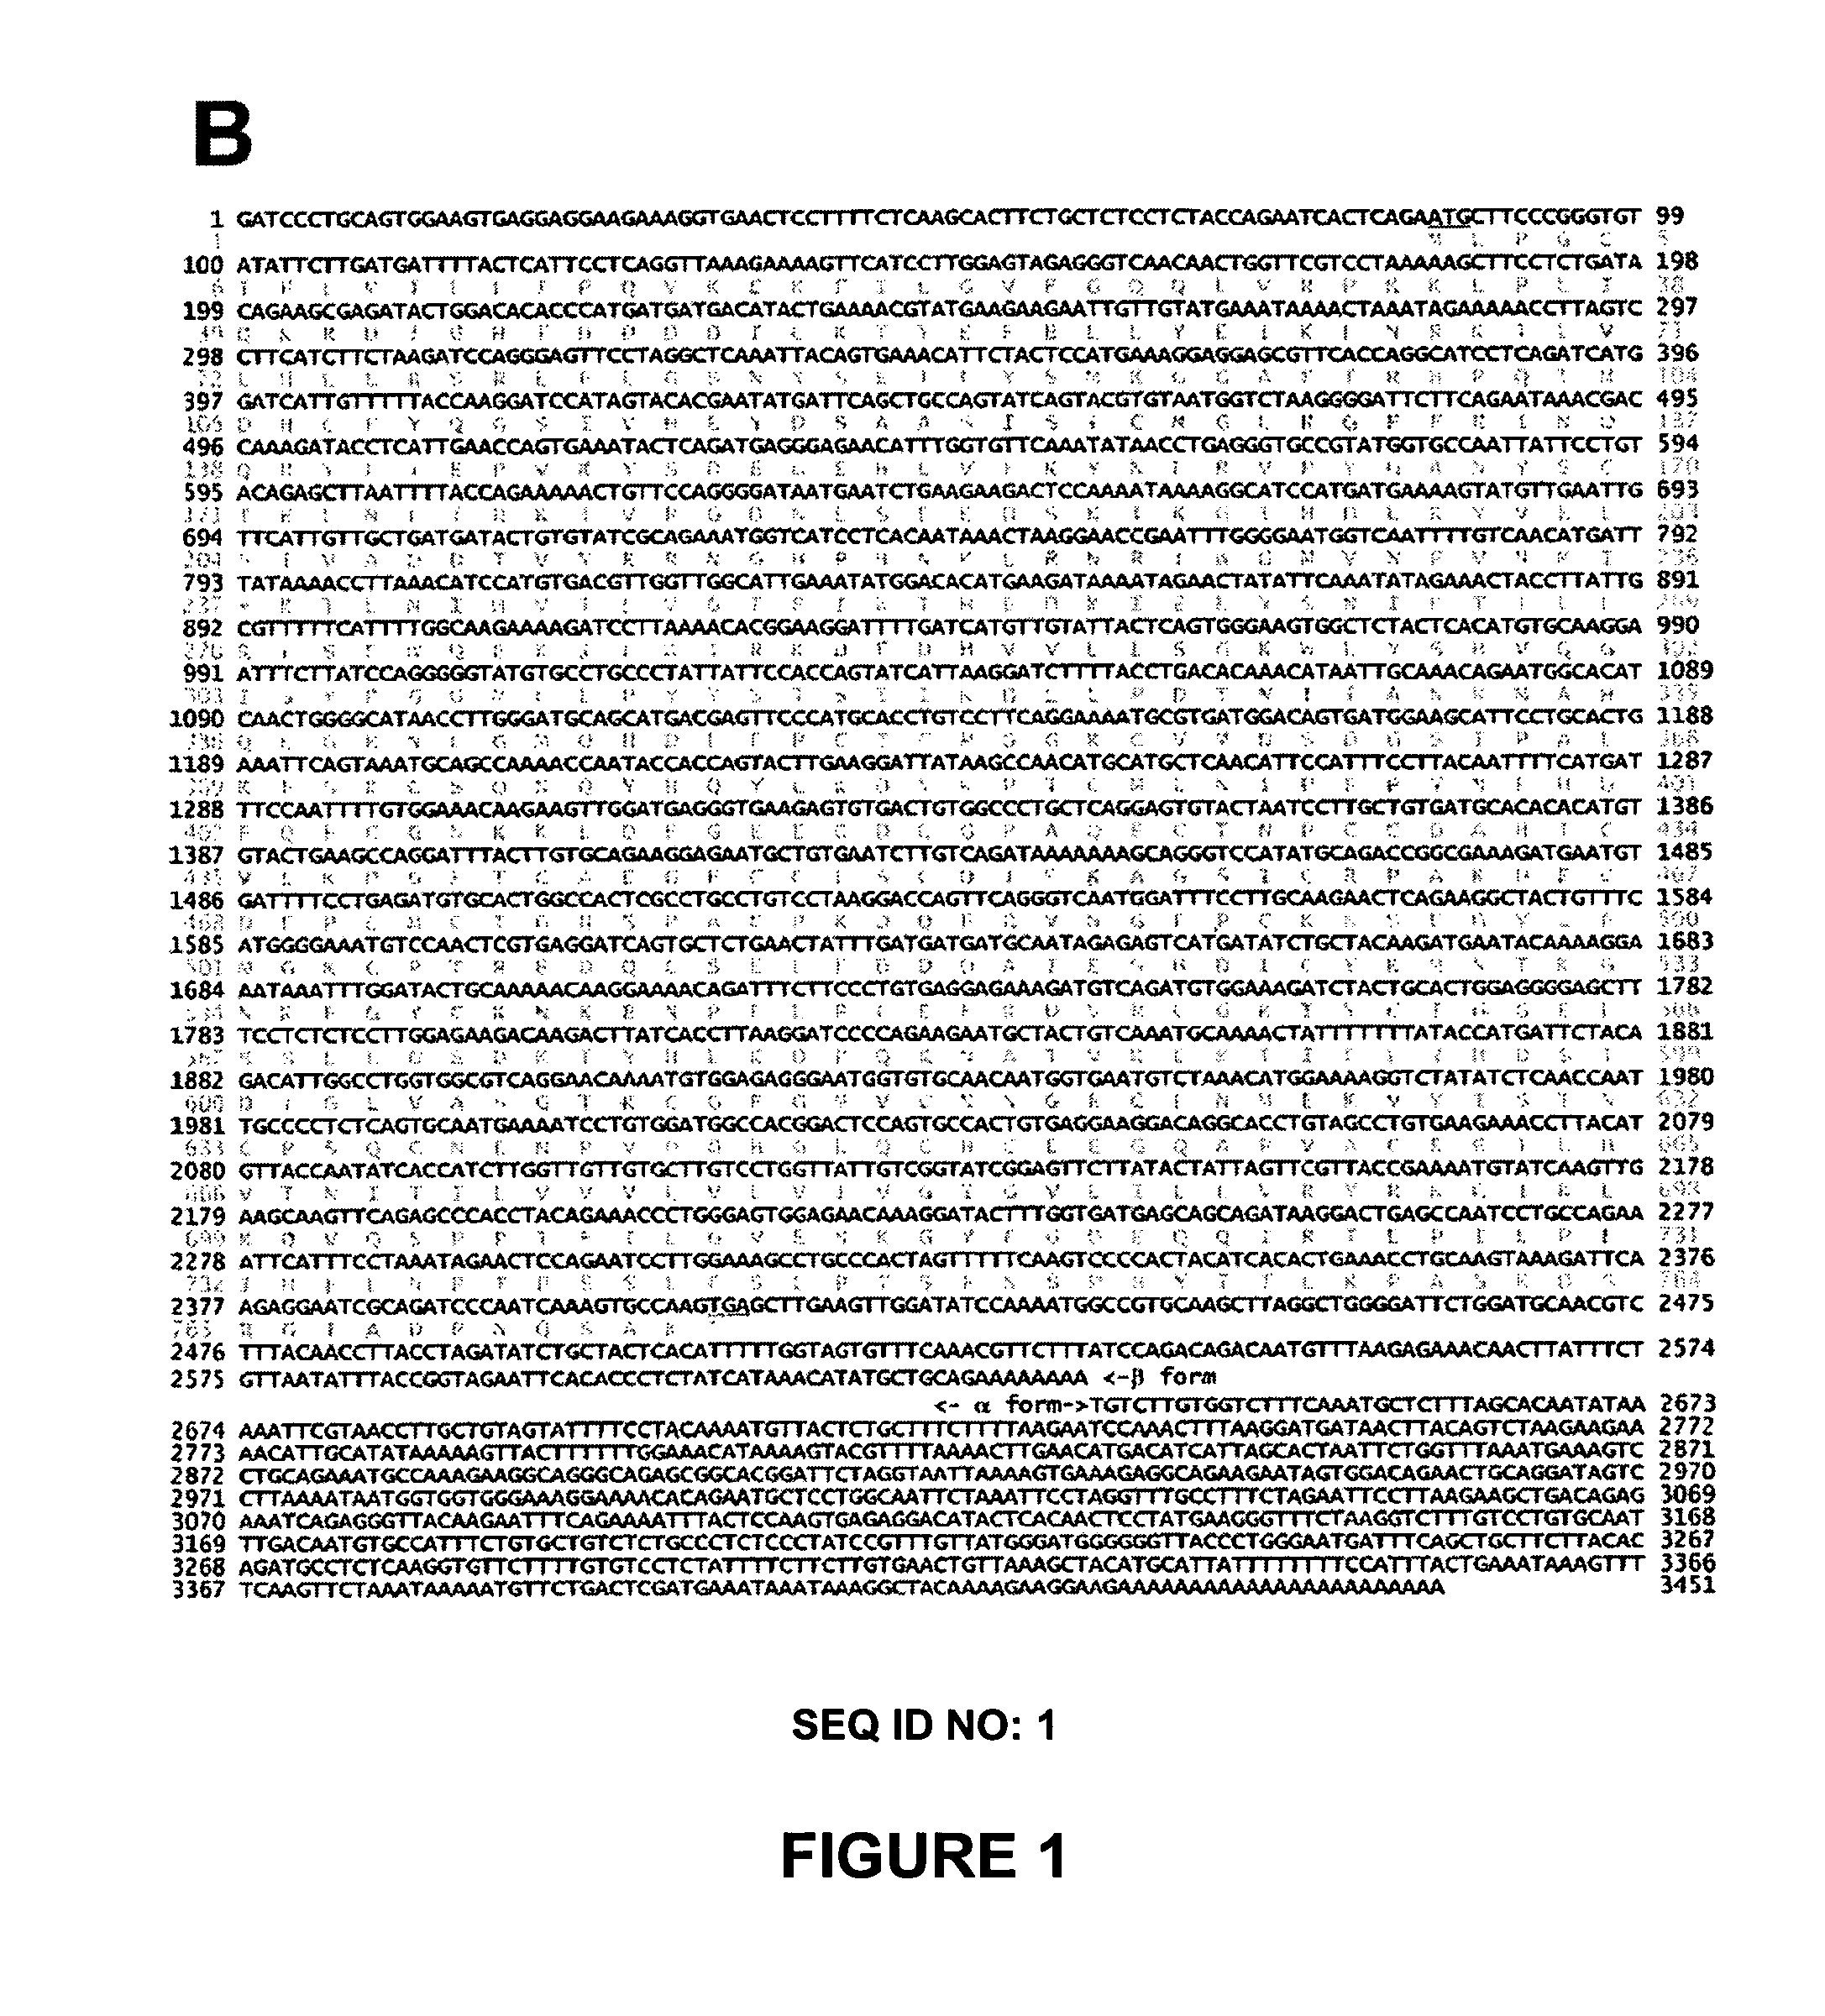 Nucleic acid molecules and polypeptides related to h-ADAM7